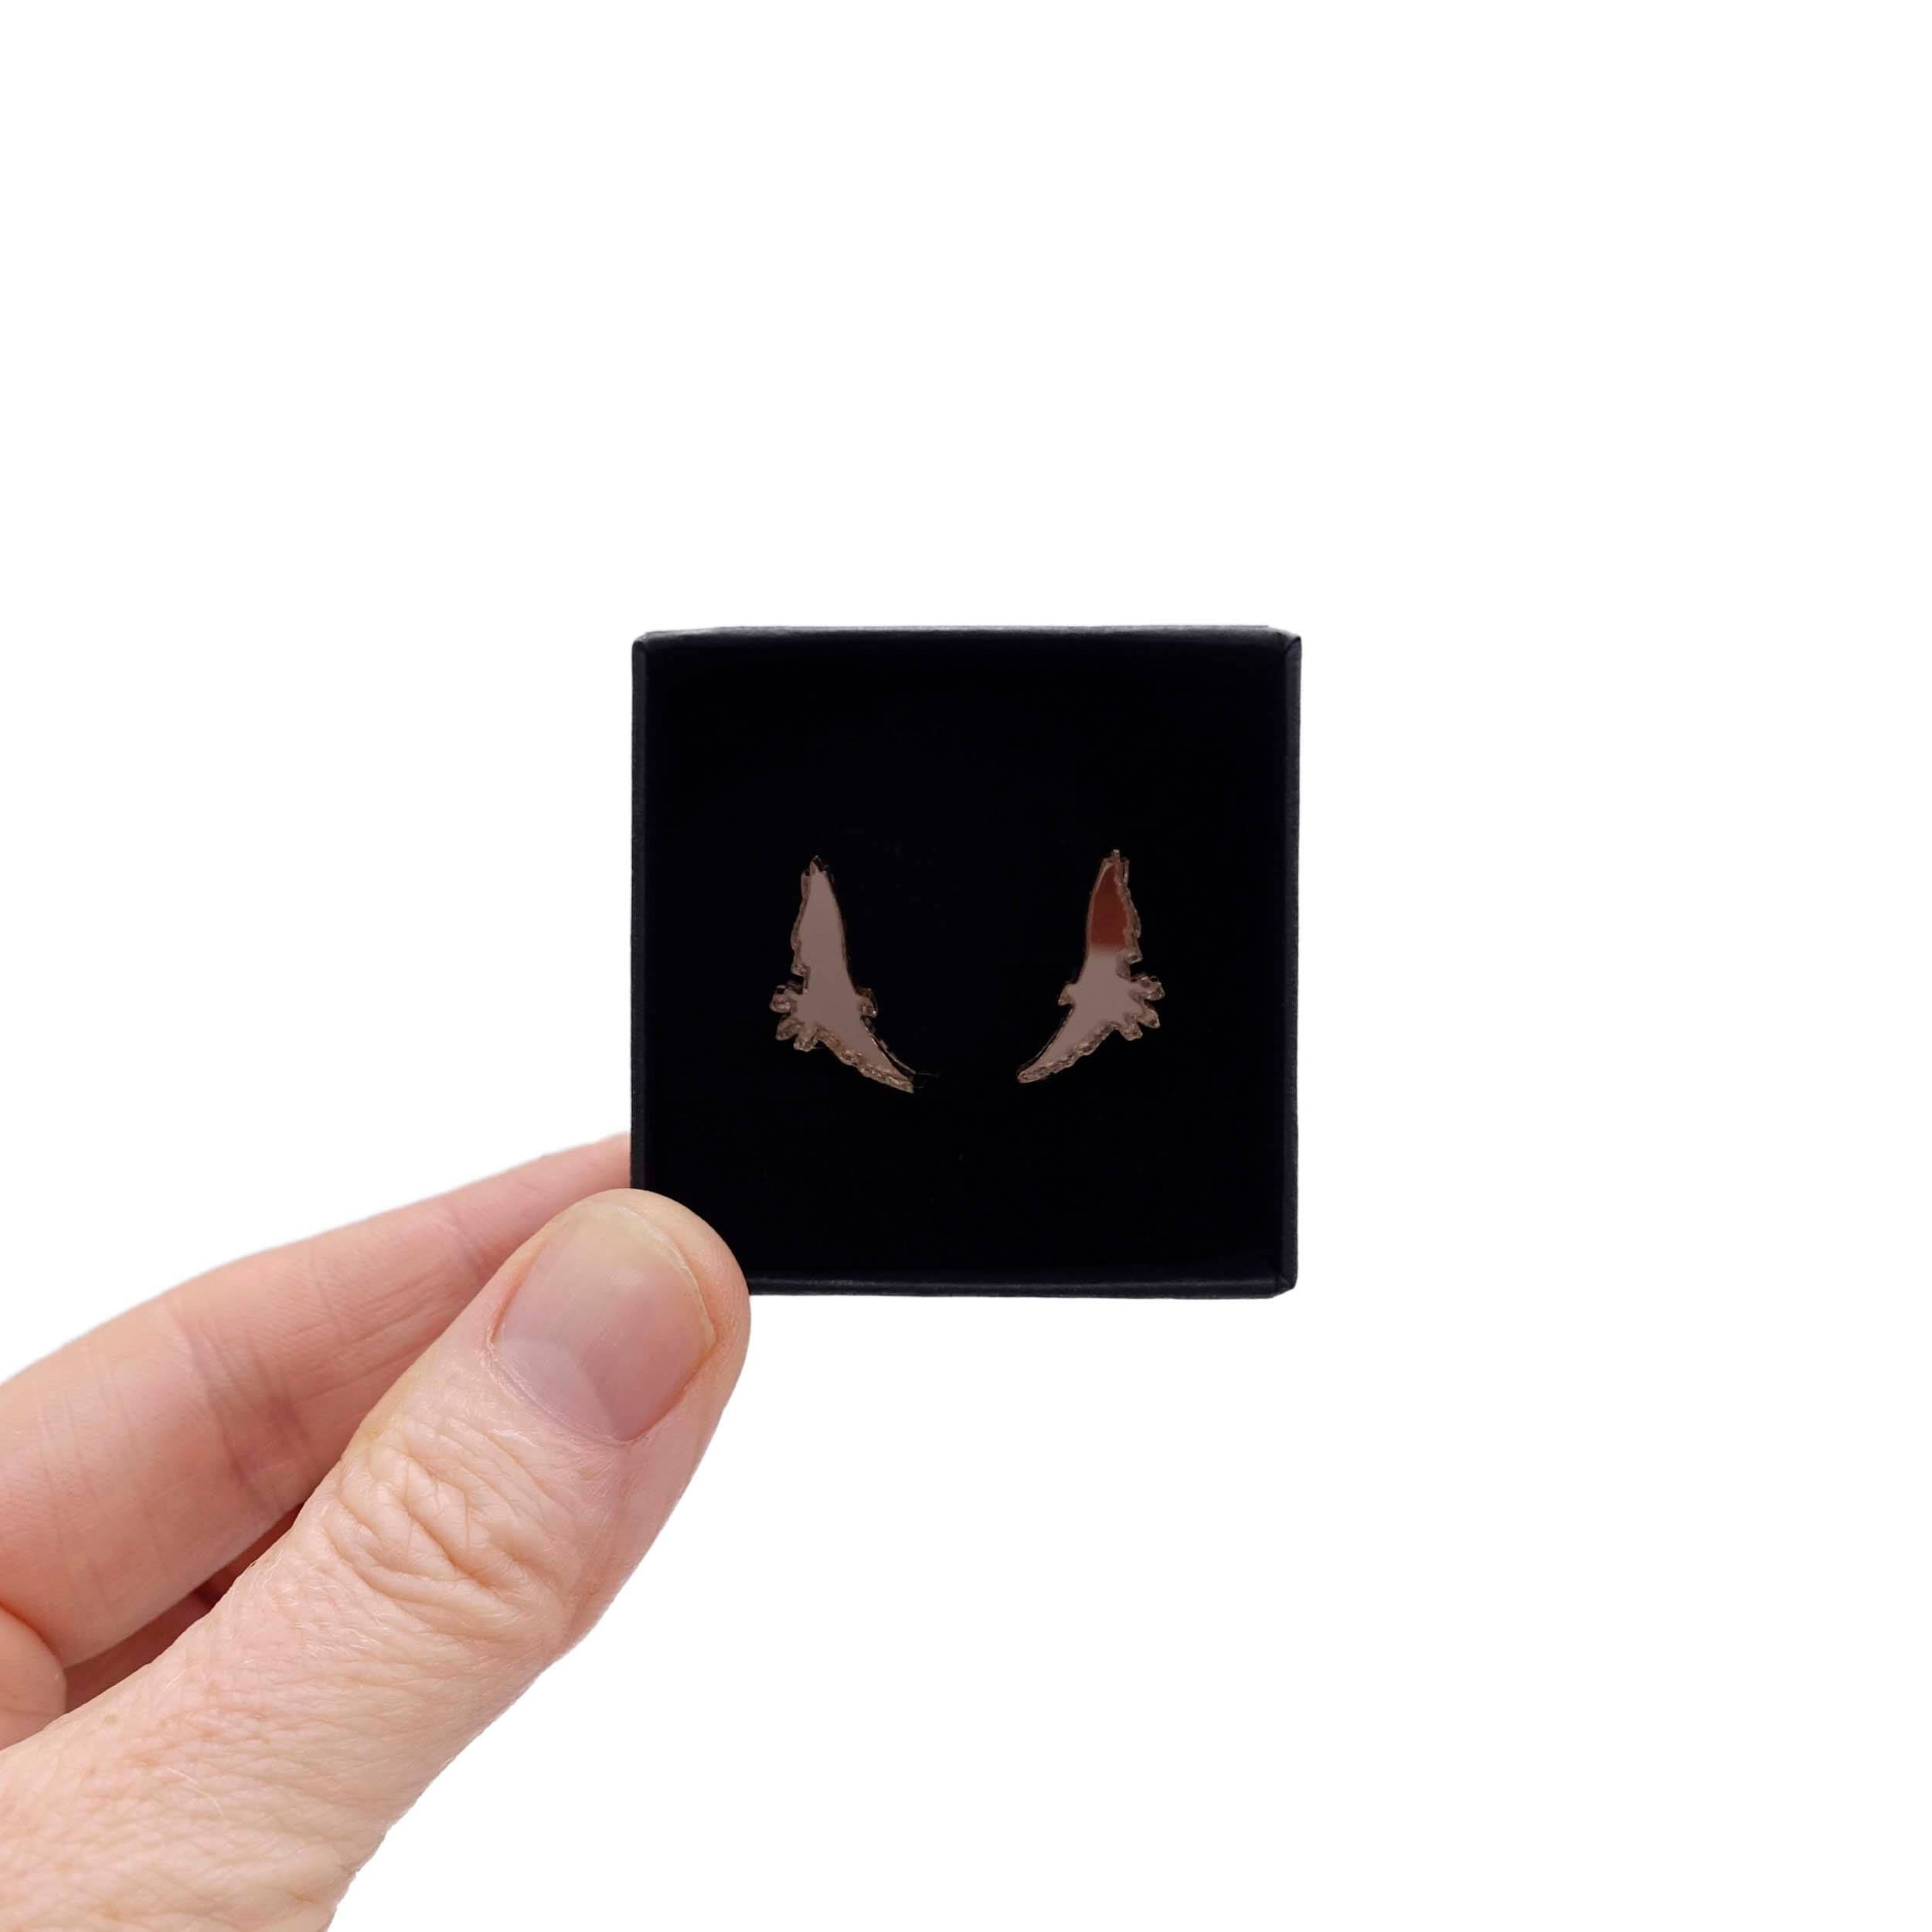 Bronze bird stud earrings that complement the jewellery in the the Brontë Collection, designed by Sarah Day in collaboration with the Brontë Parsonage Museum. Shown held up in a Wear and Resist gift box.